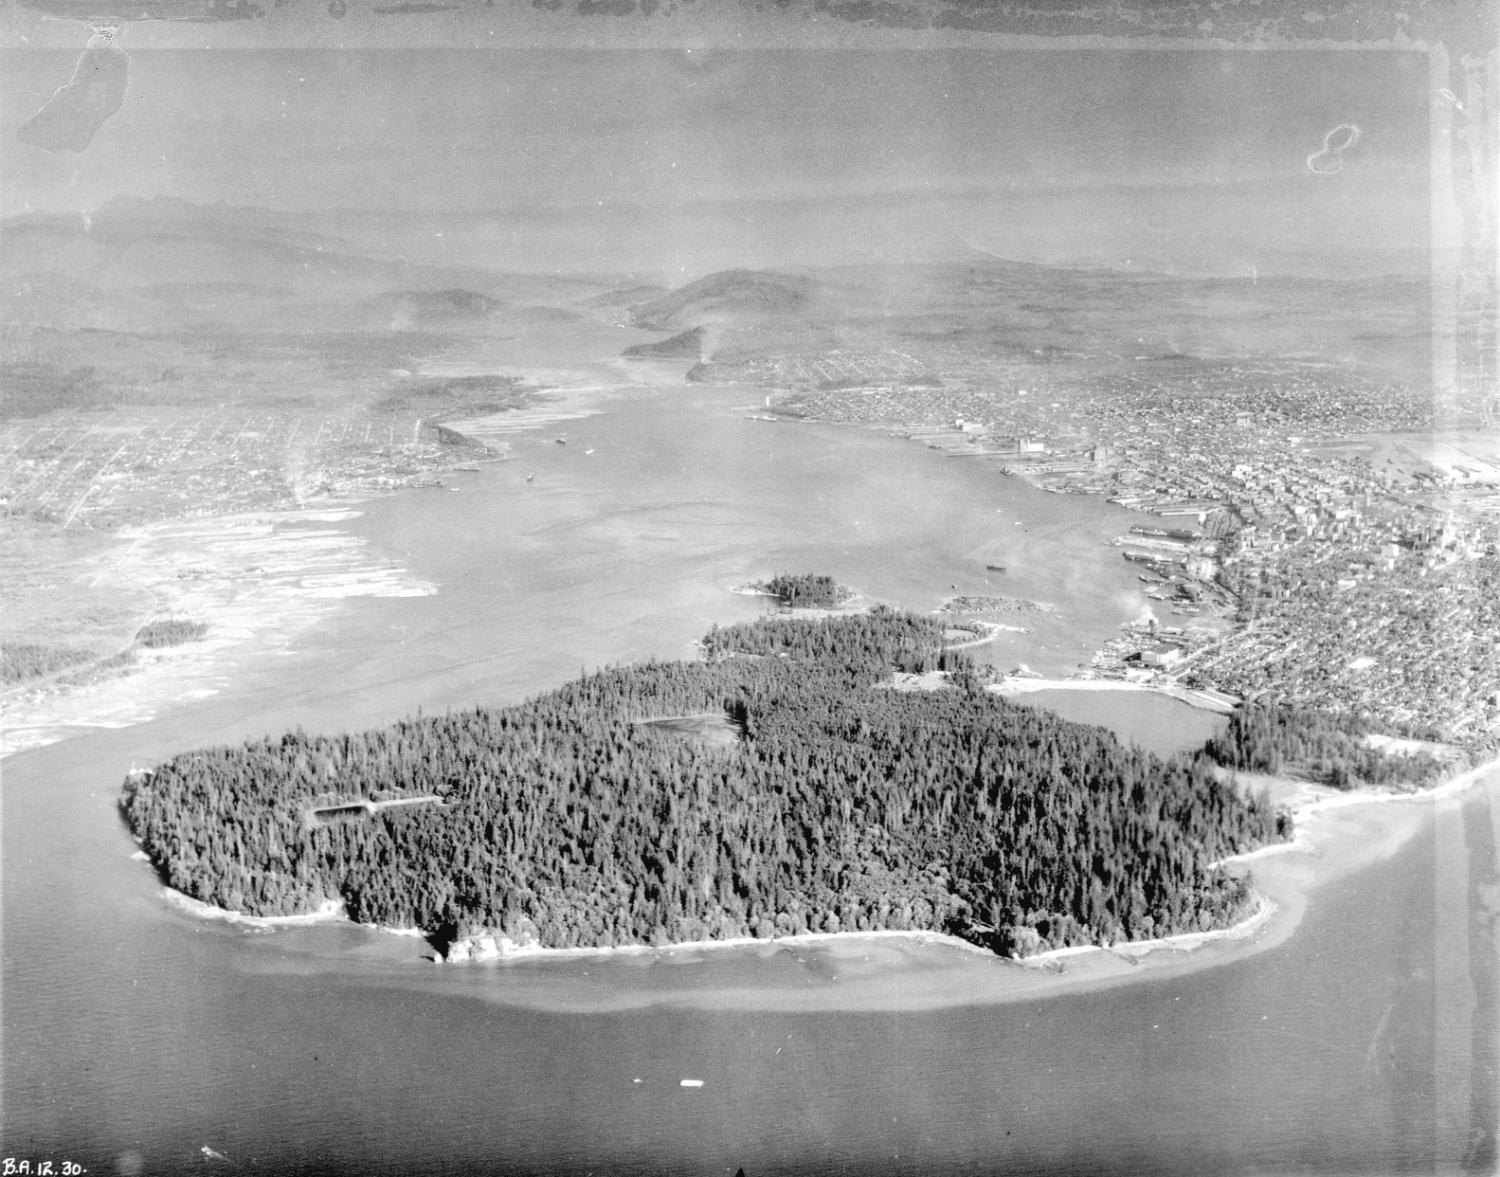 Aerial view looking east over Stanley Park, Coal Harbour and the Burrard Inlet in 1926.